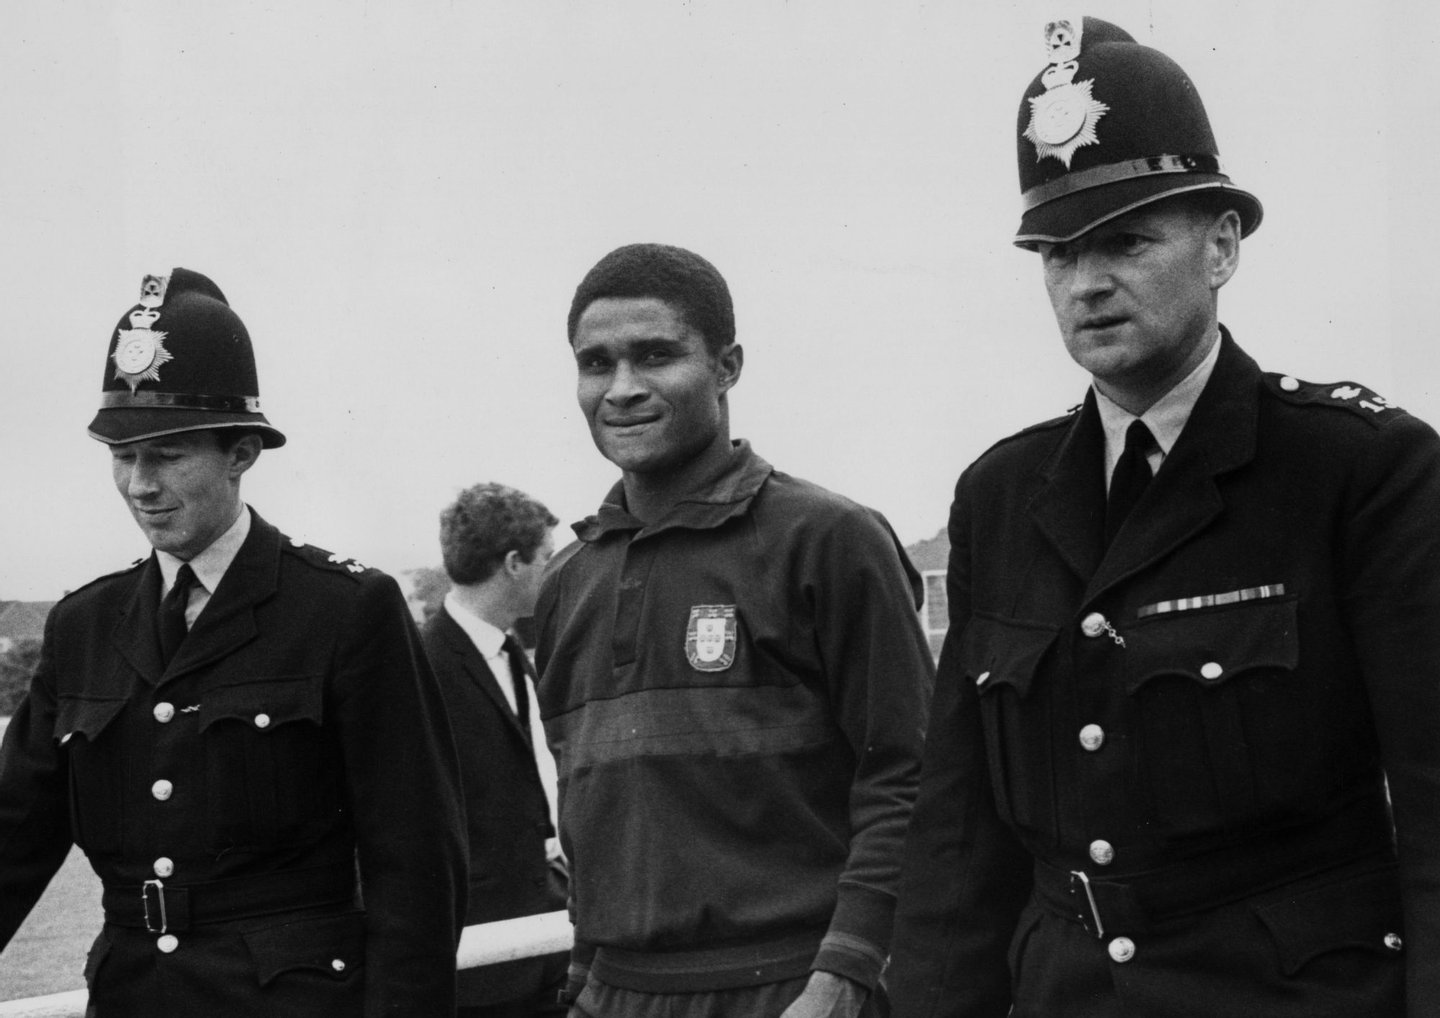 21st July 1966: Portuguese footballer, Eusebio, being escorted by two policemen to protect him from the autograph hunters who follow him everywhere. (Photo by Central Press/Getty Images)